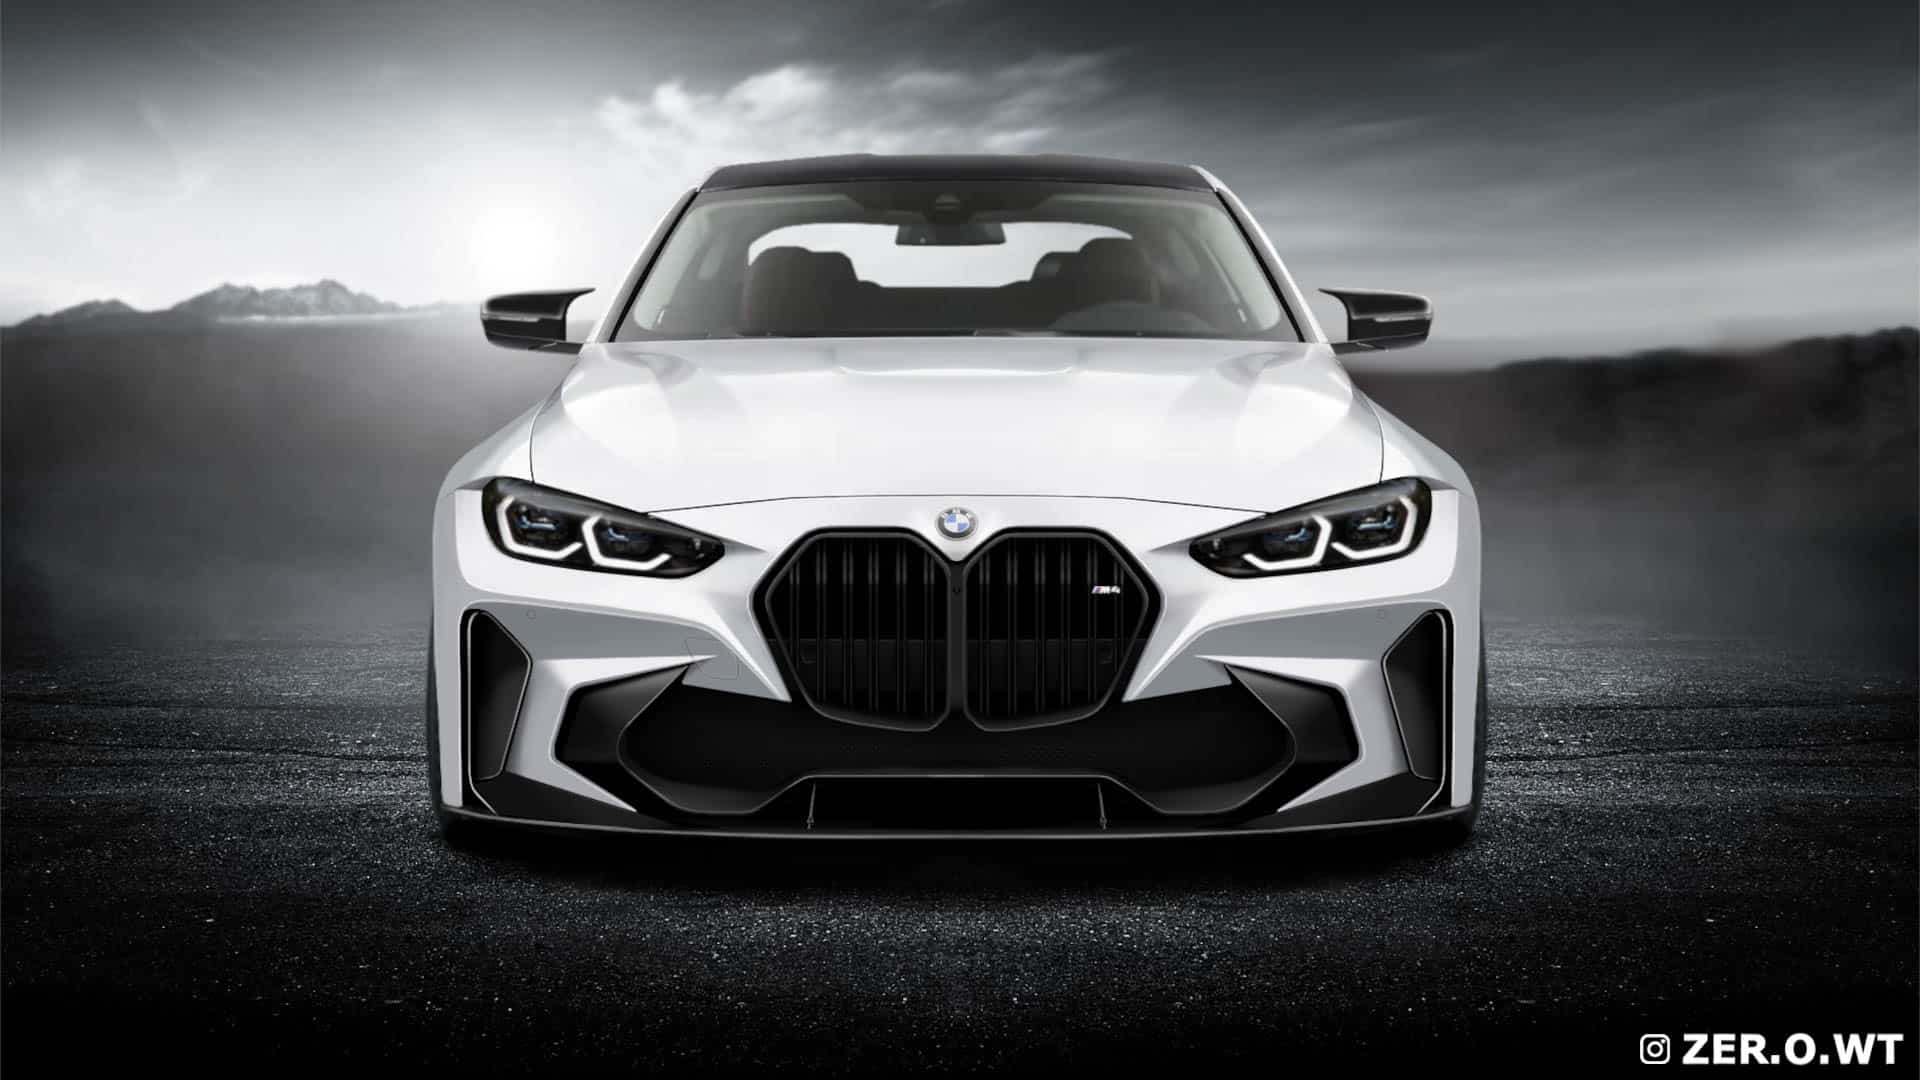 Check Out This BMW M4 Re Design With New Grille And Widebody Kit